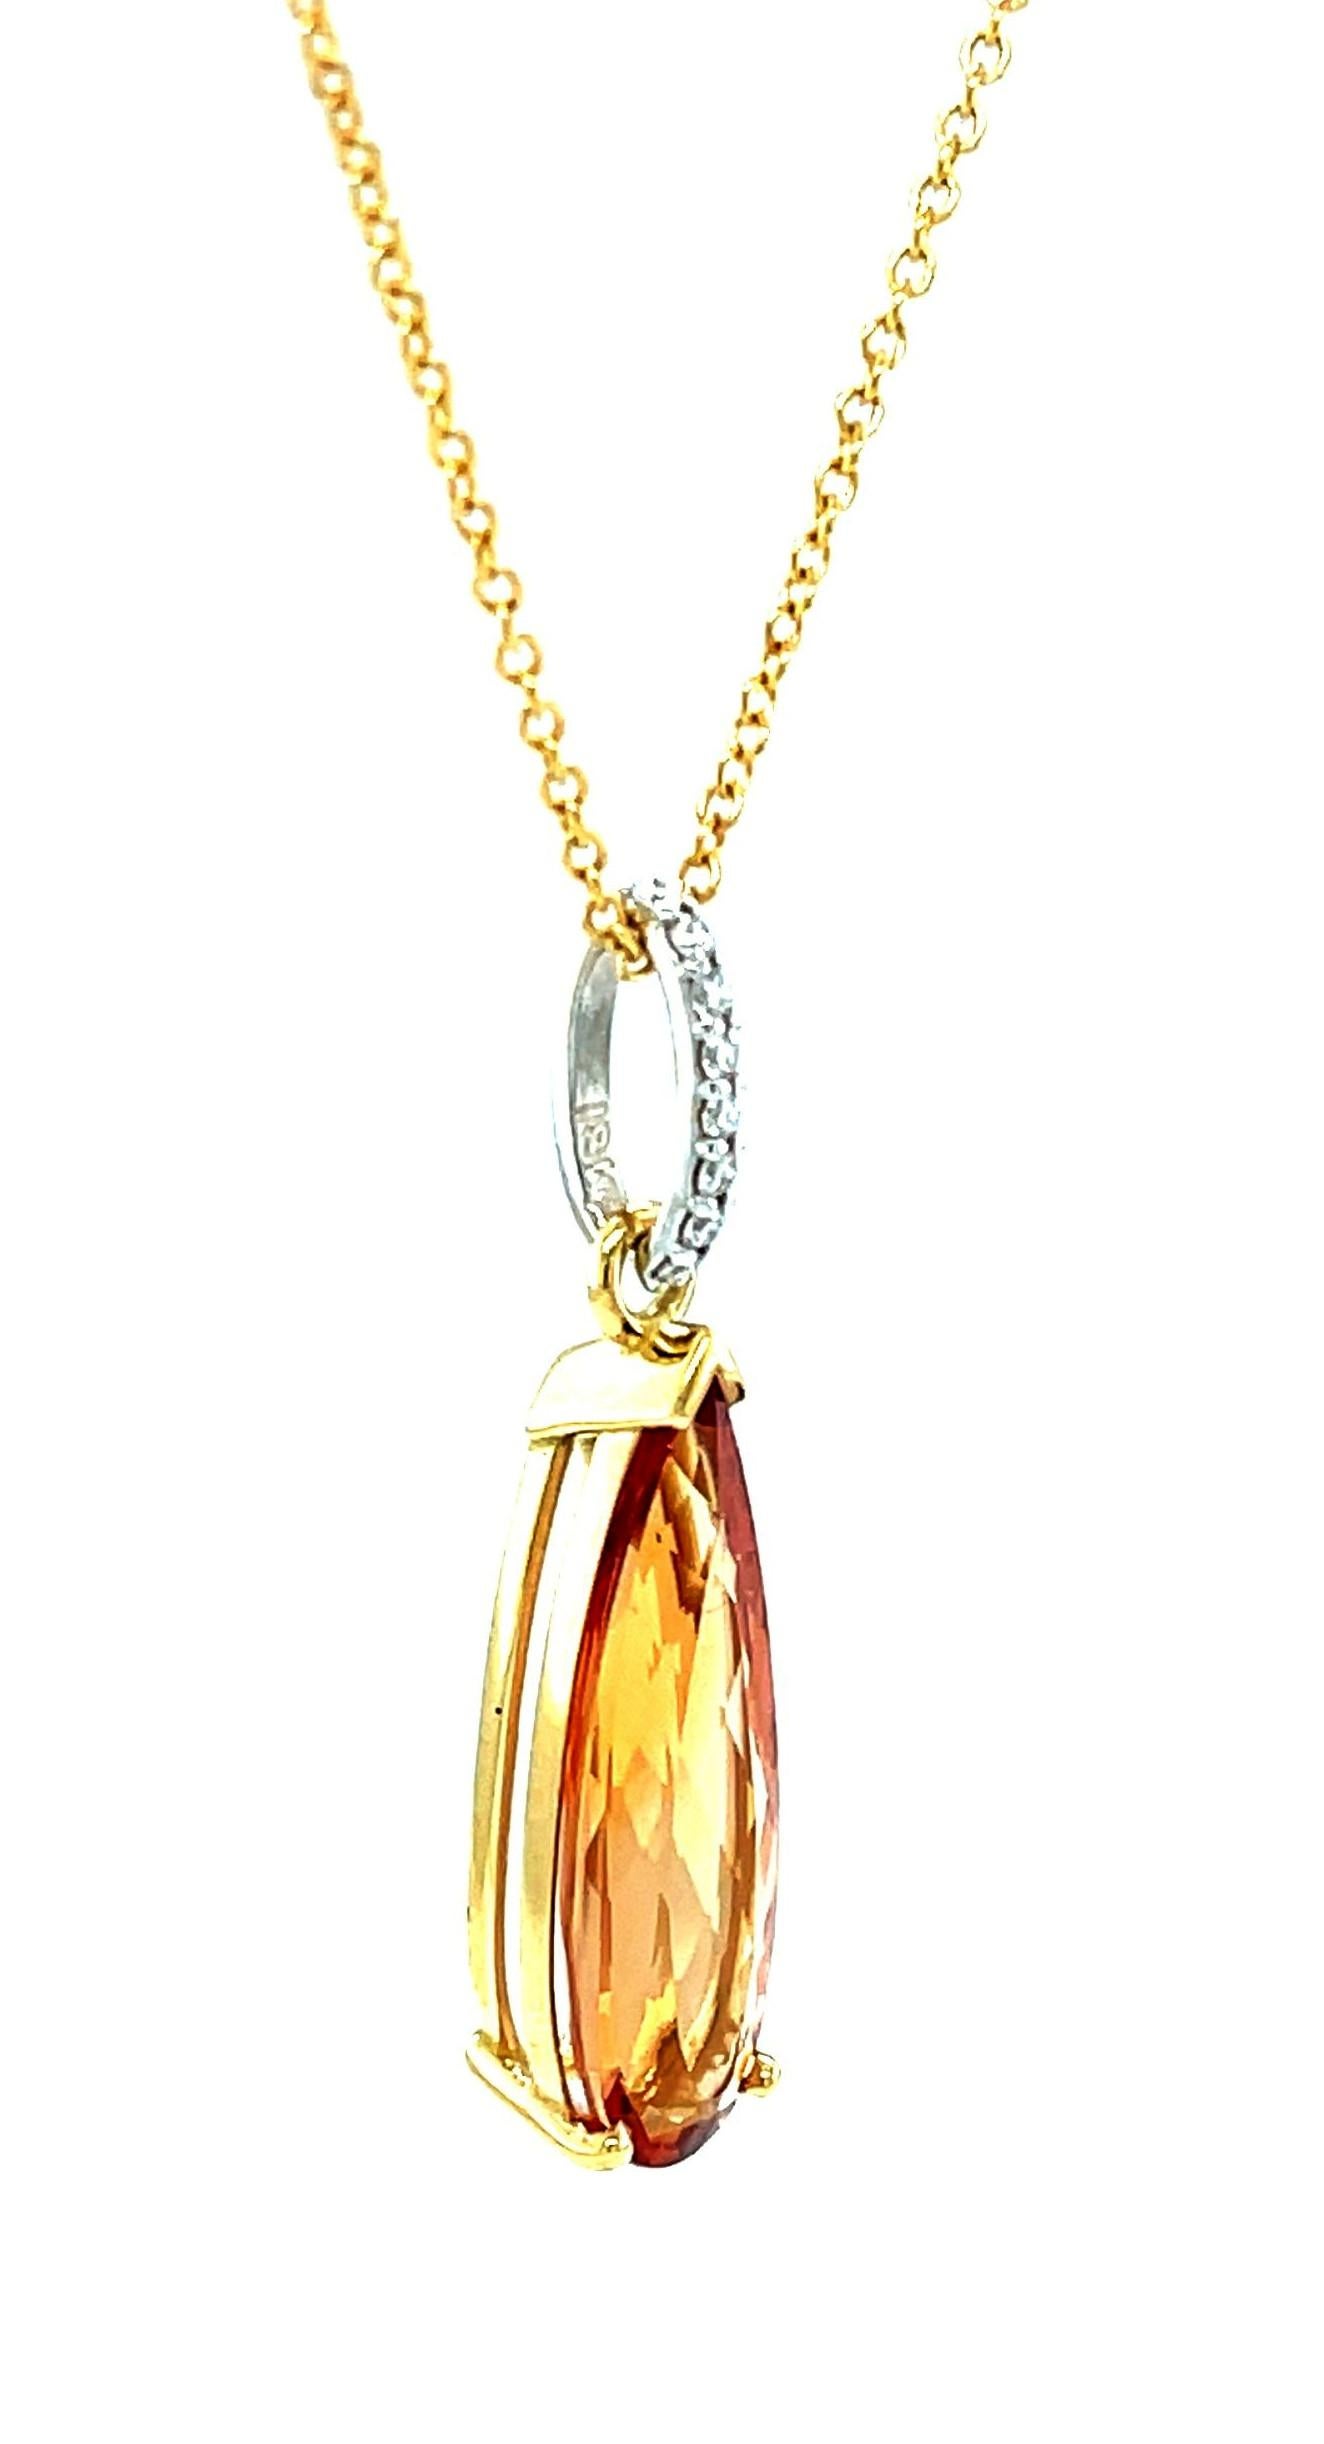 This imperial topaz and diamond drop pendant features a gorgeous 5.56 carat gem-quality precious topaz set in 18k white and yellow gold. The imperial topaz is an elegant, elongated pear shape with exquisite reddish orange color and exceptional